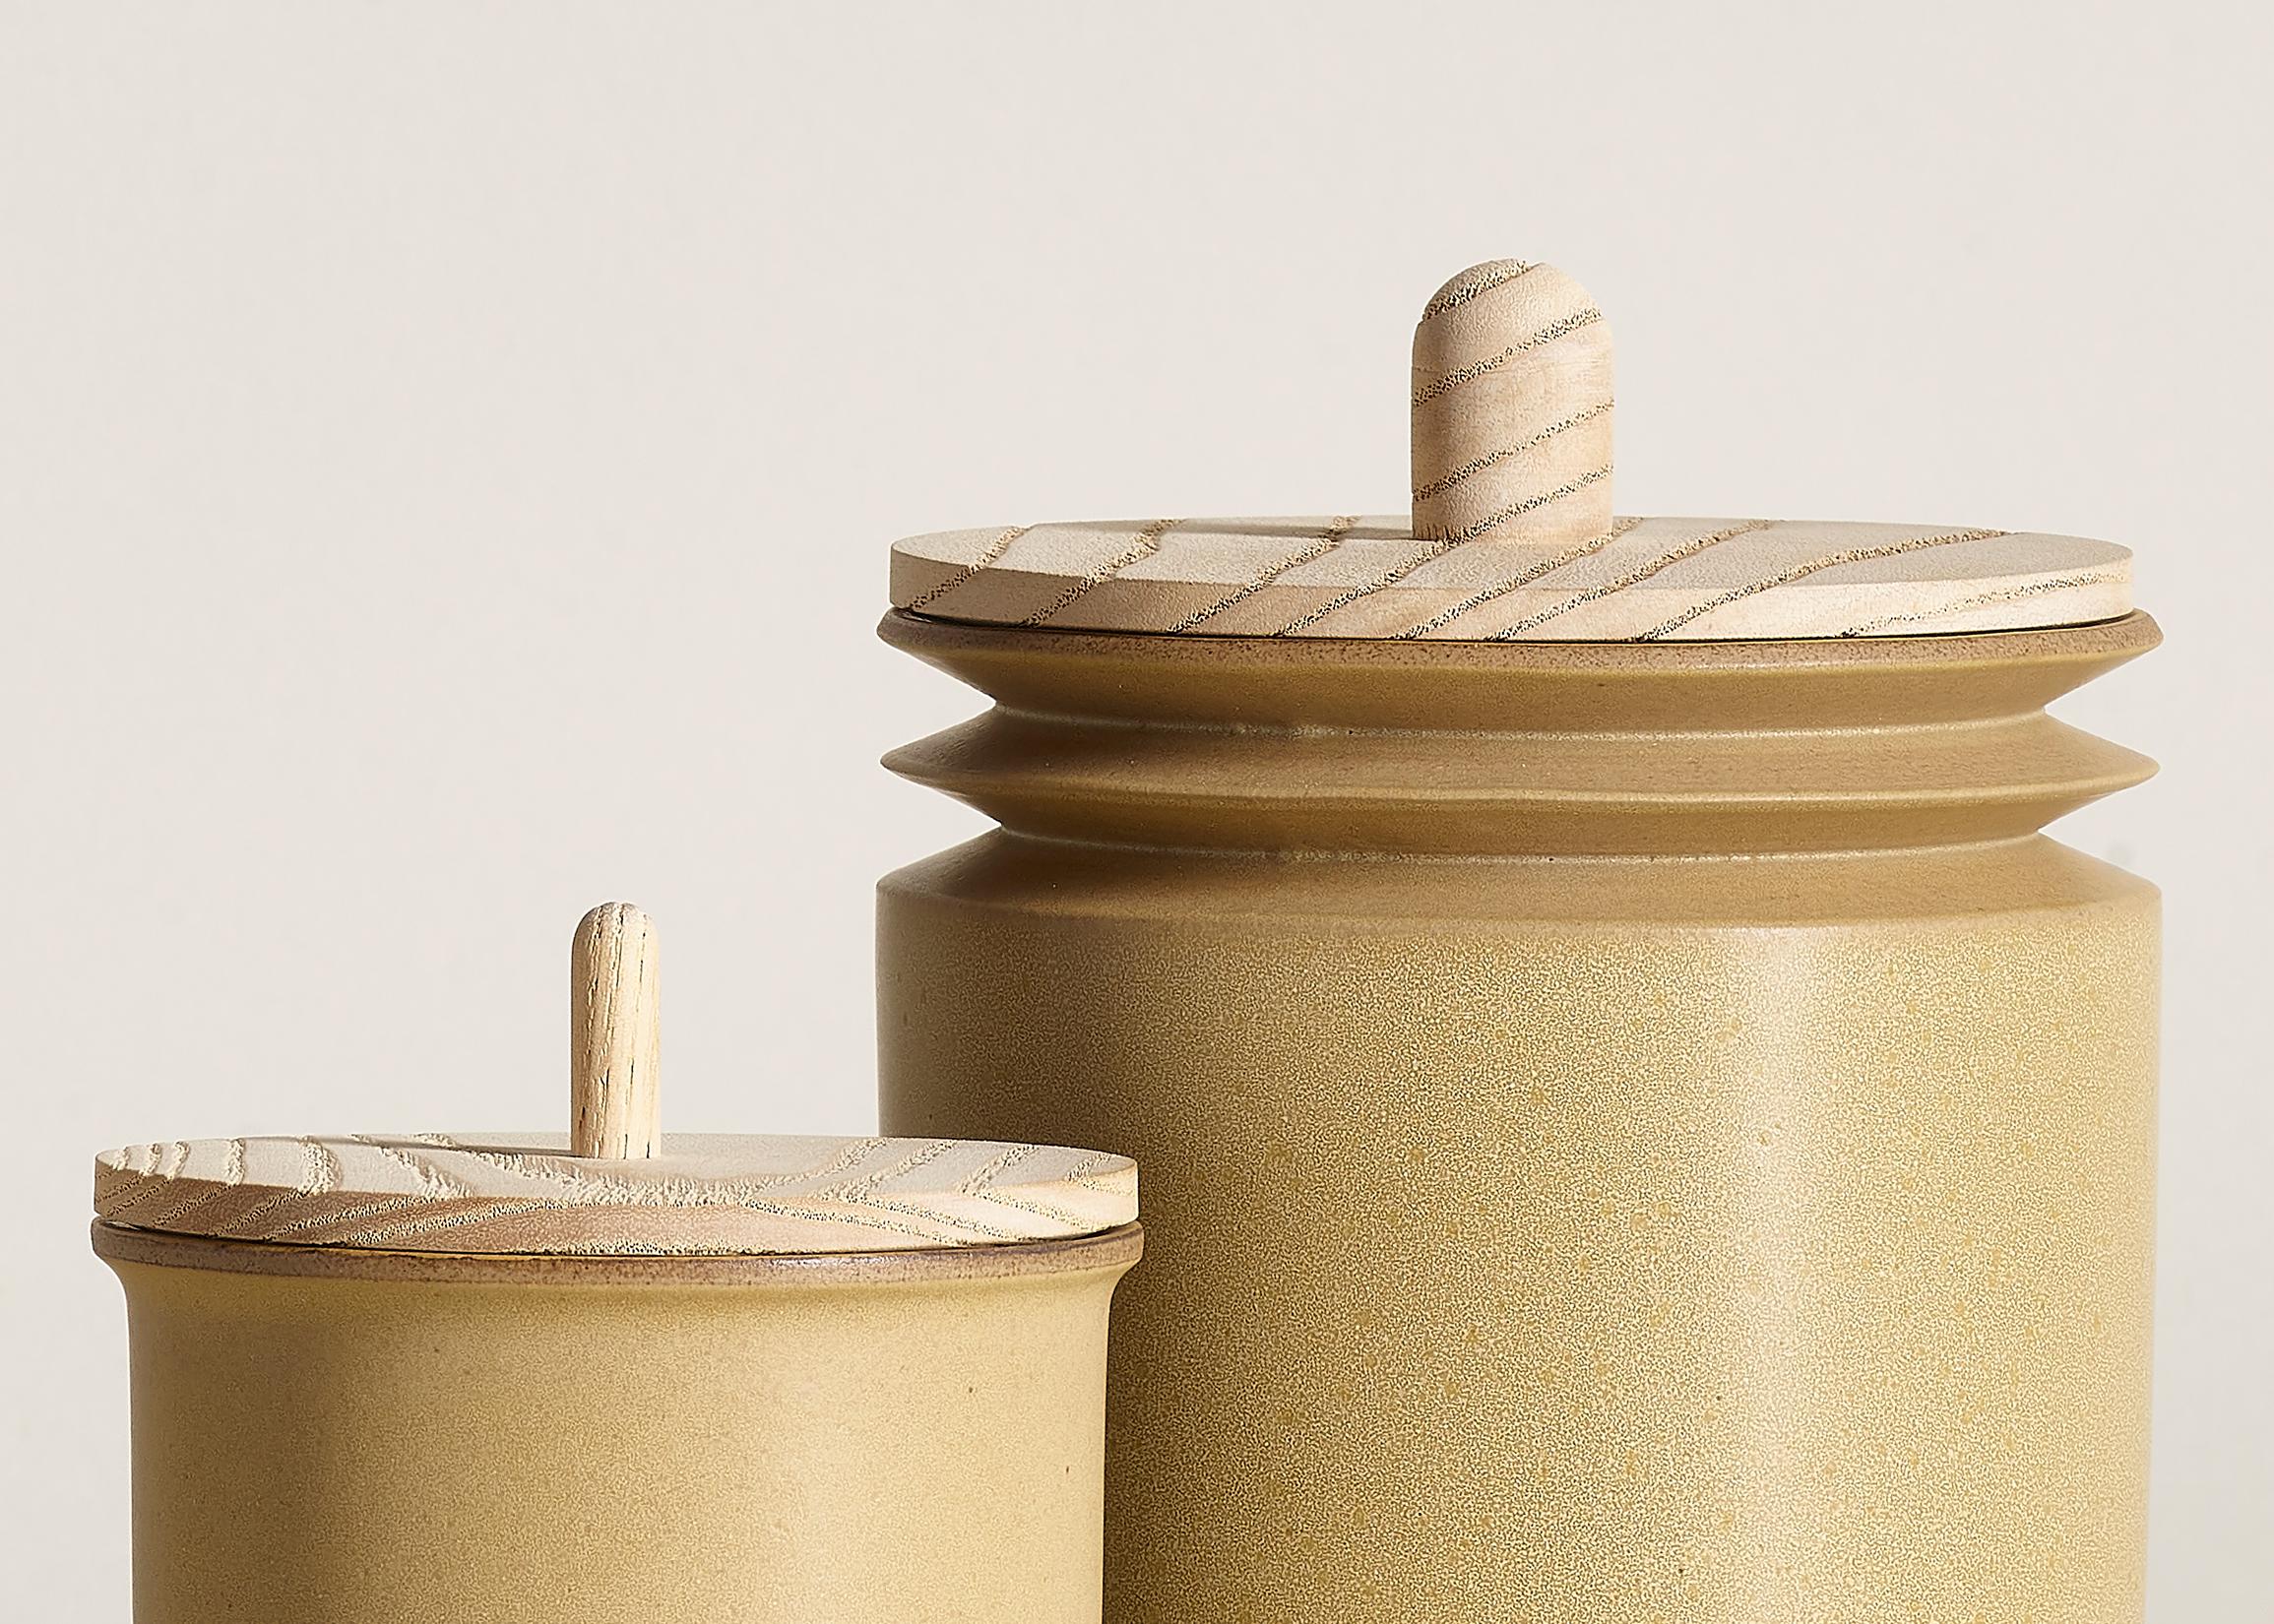 Brave Matter studio’s first accessories collection is characterized by brave silhouettes and evocative material finishes. Uniting ceramic with wood they create utilitarian objects that are equally resolute and ethereal, visceral and